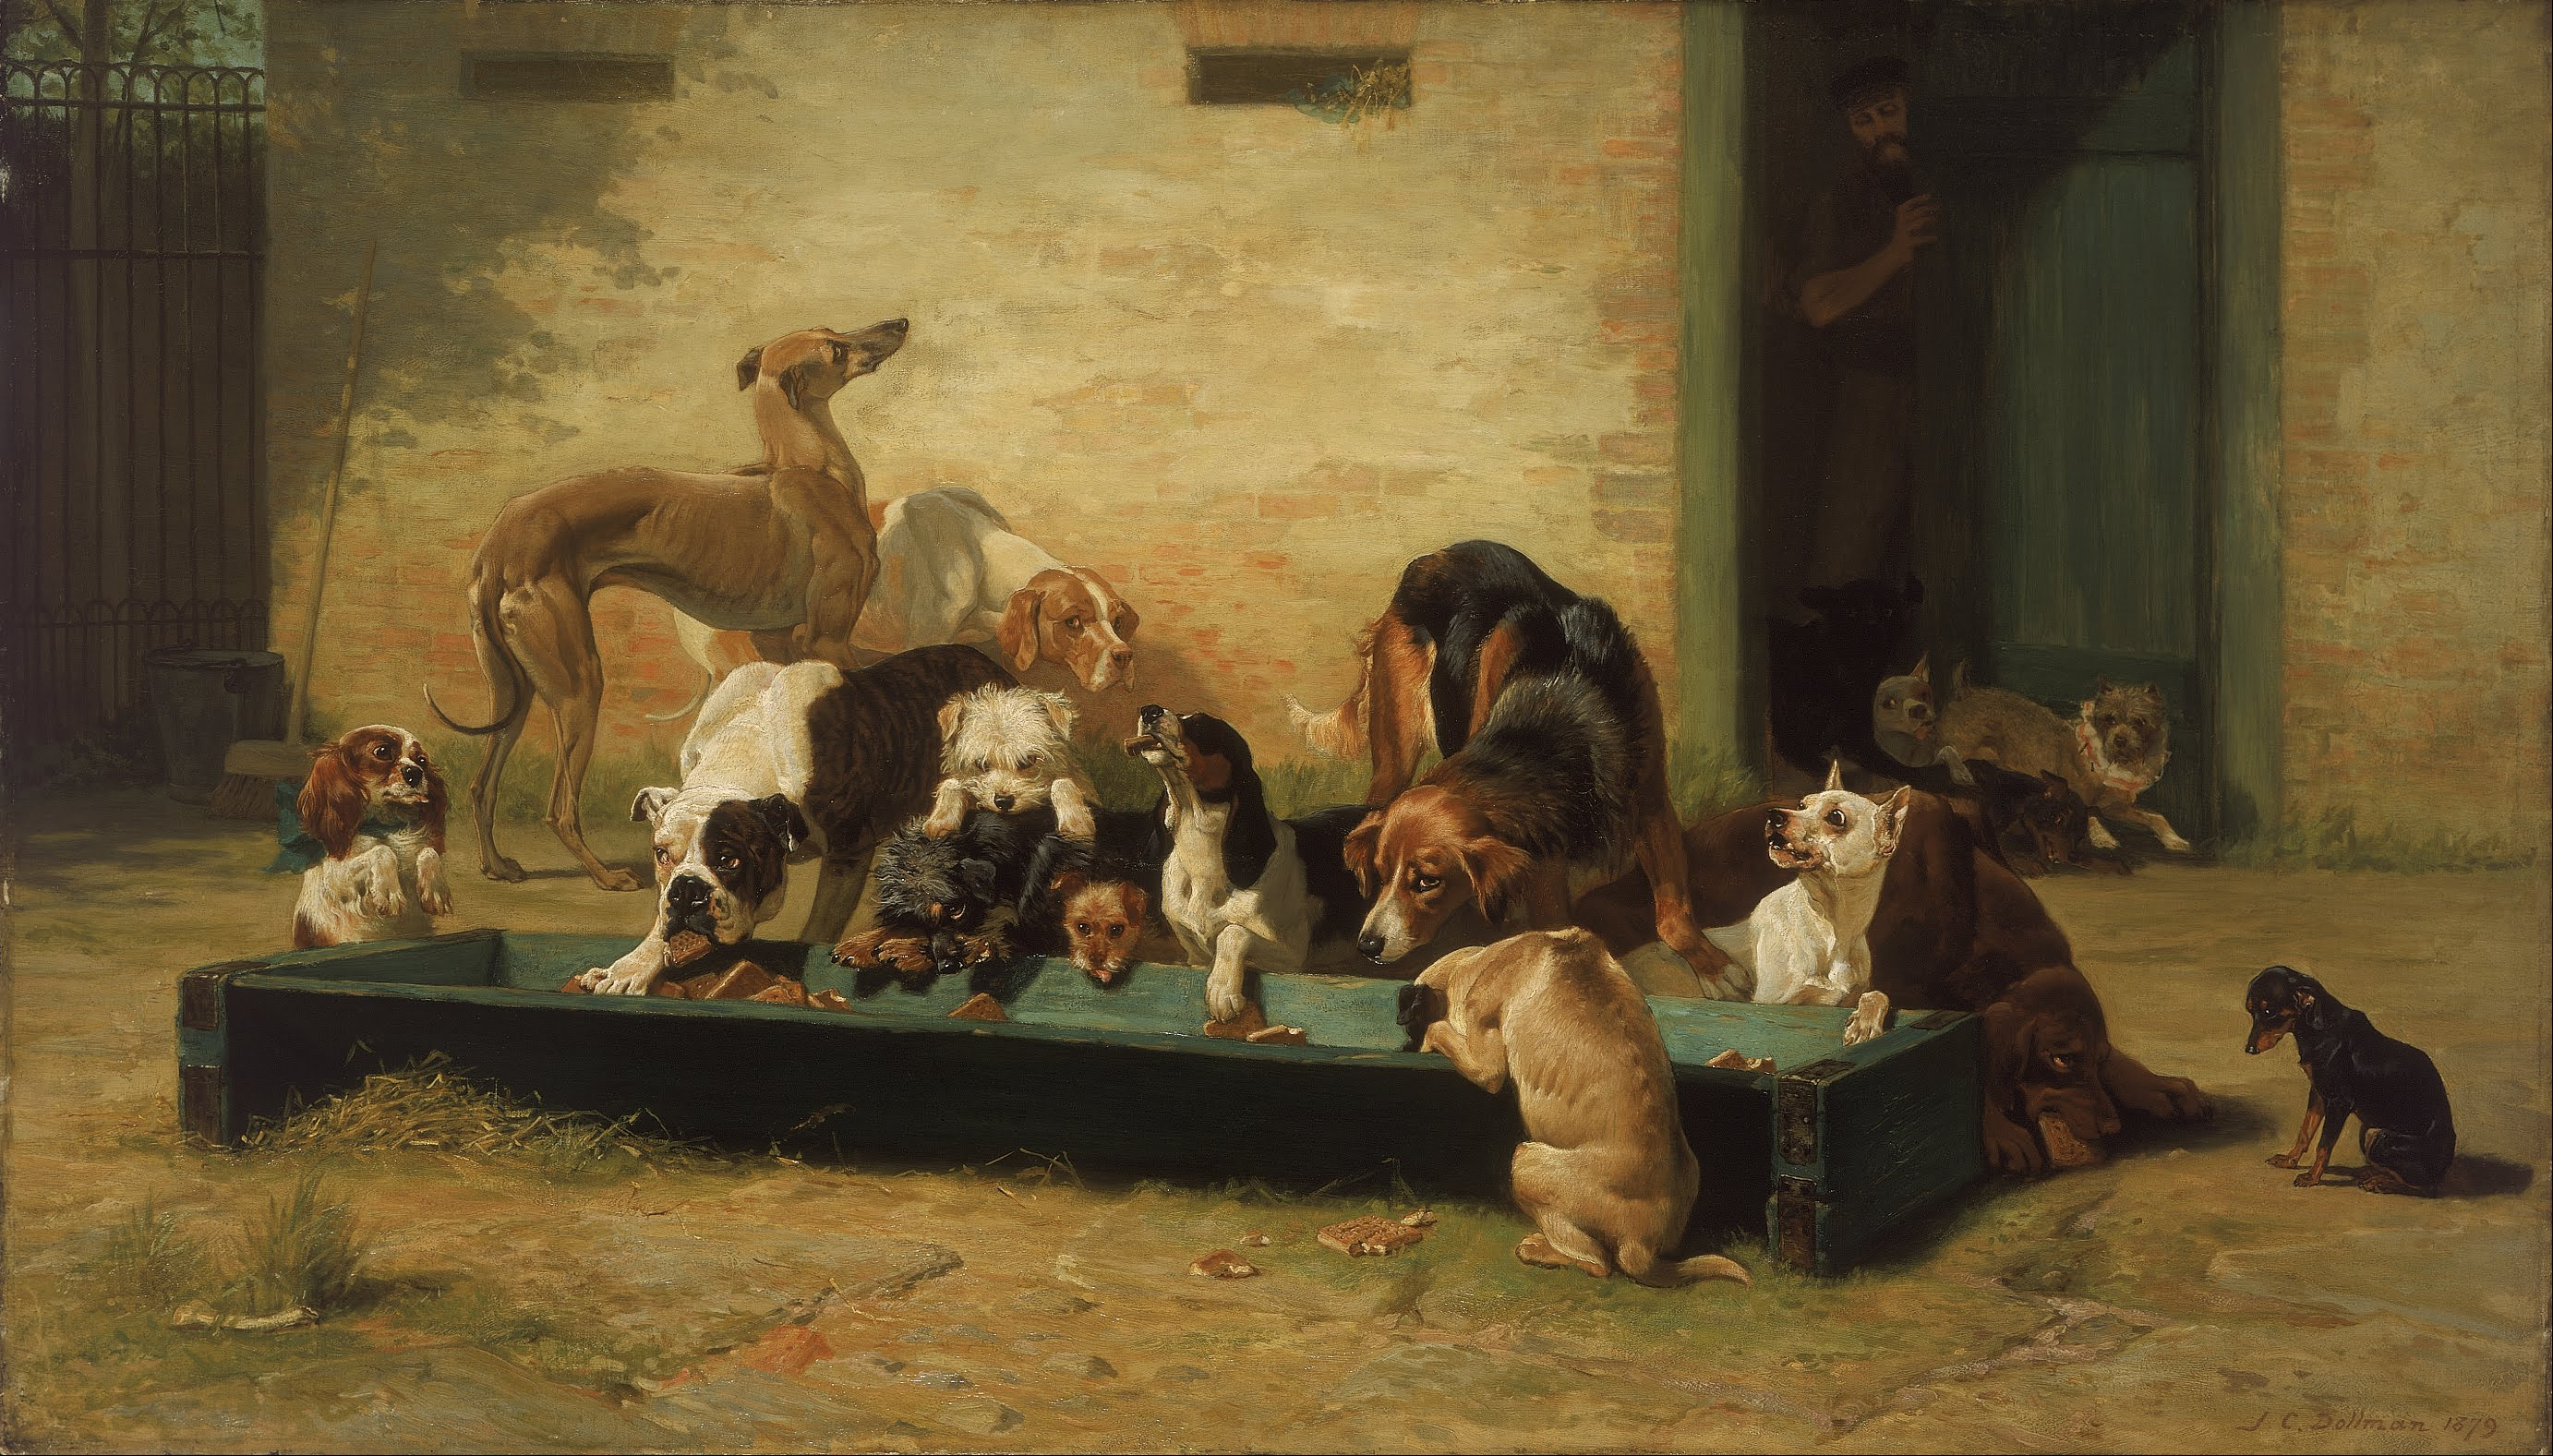 John Charles Dollman - Table d'Hote at a Dogs' Home - Google Art Project